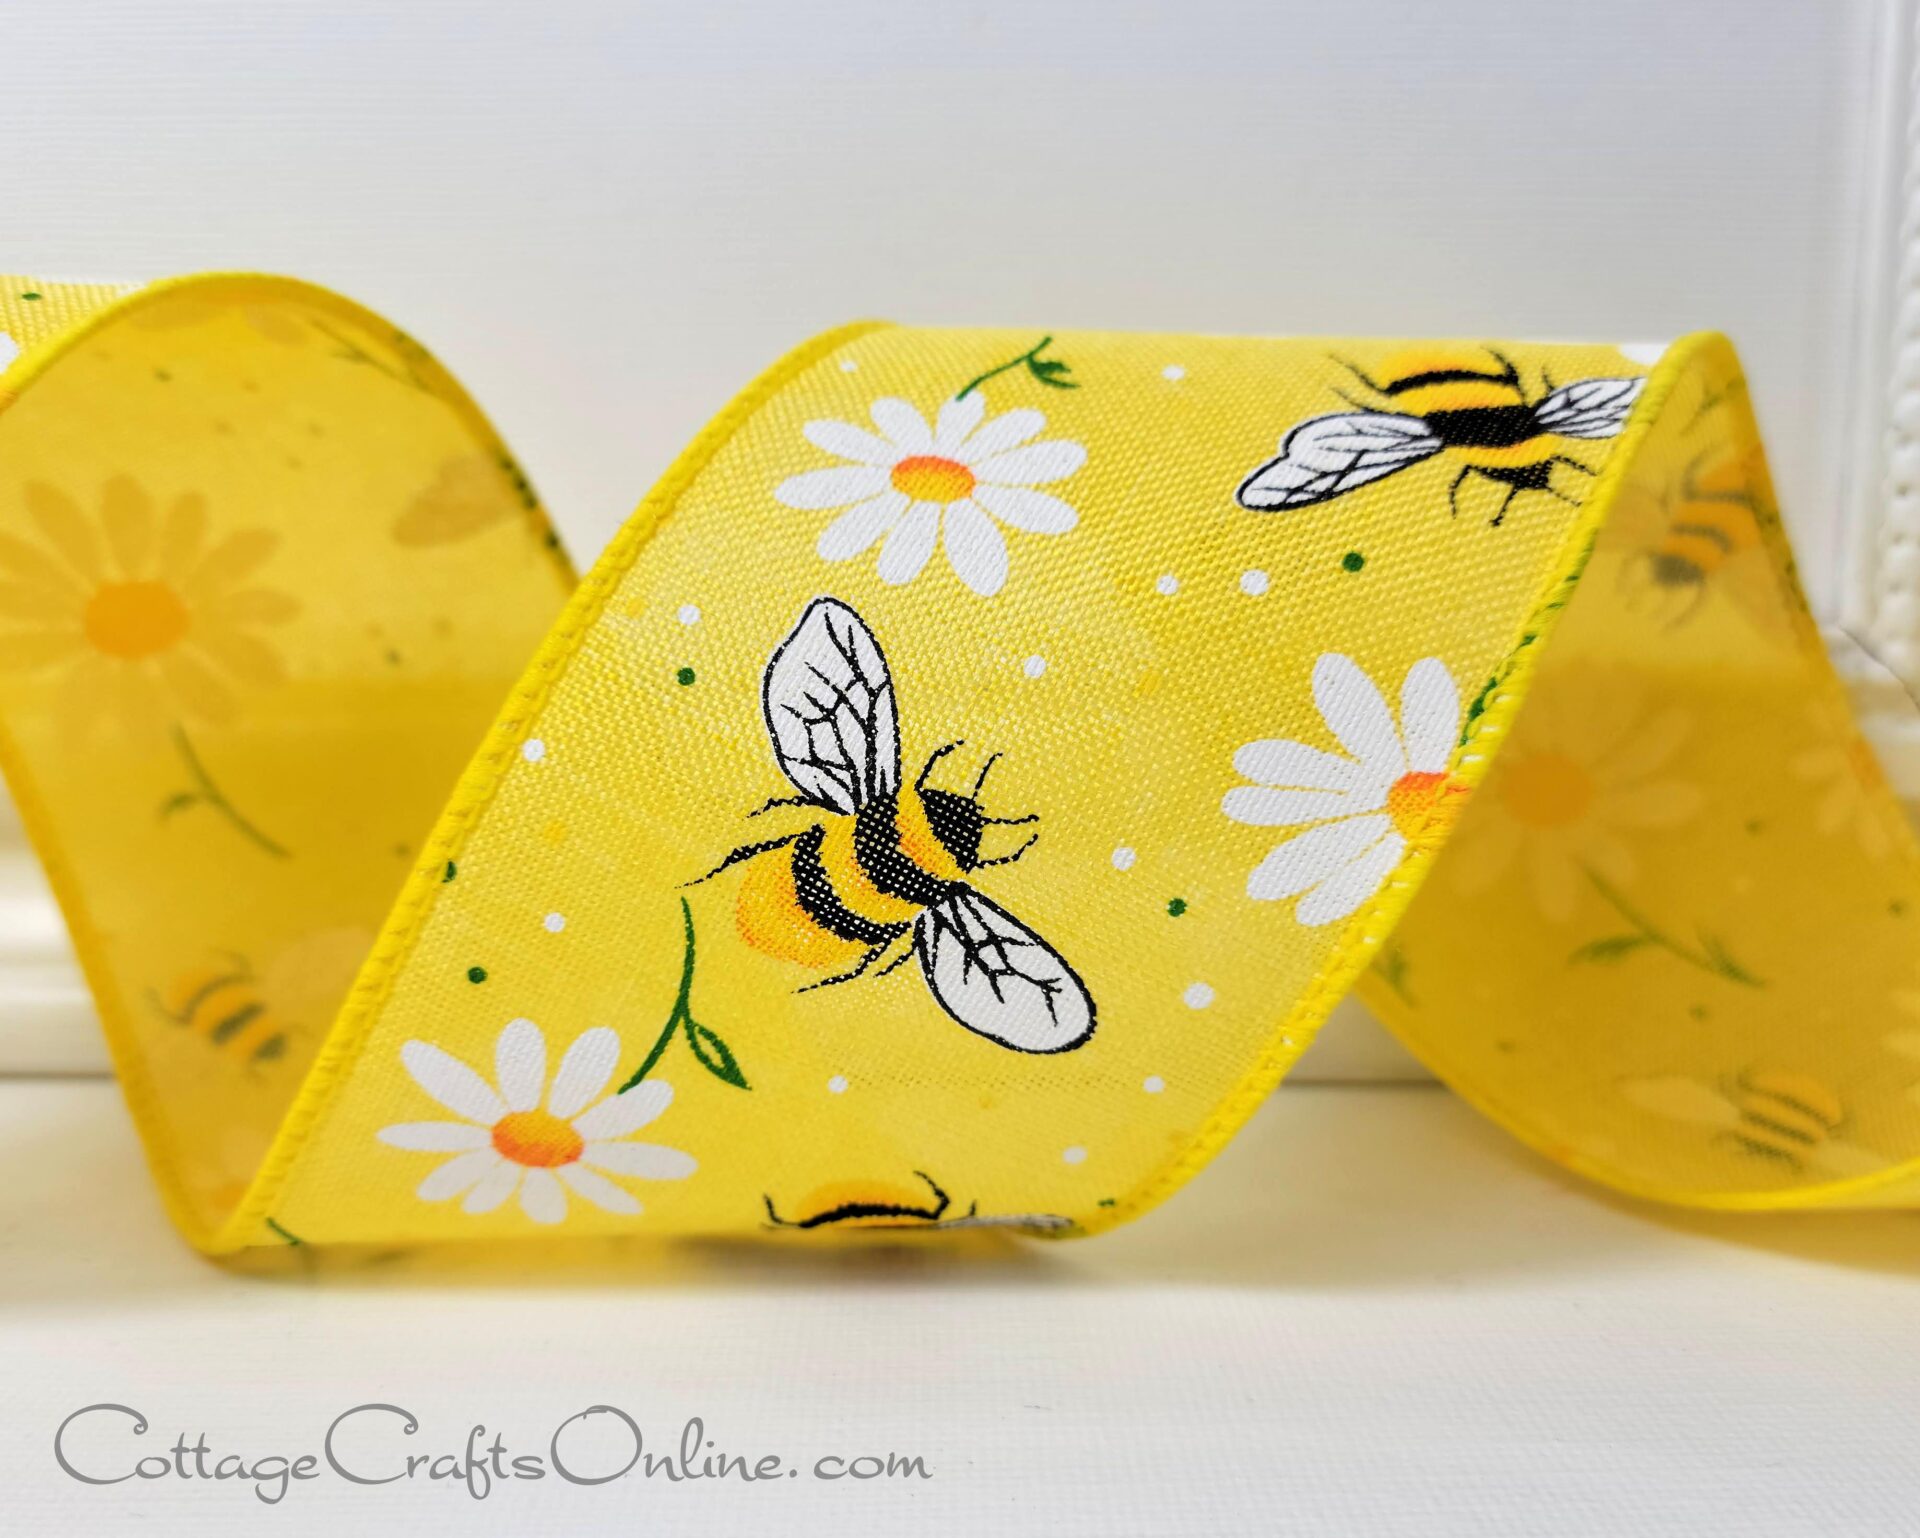 A yellow ribbon with bees and daisies on it.